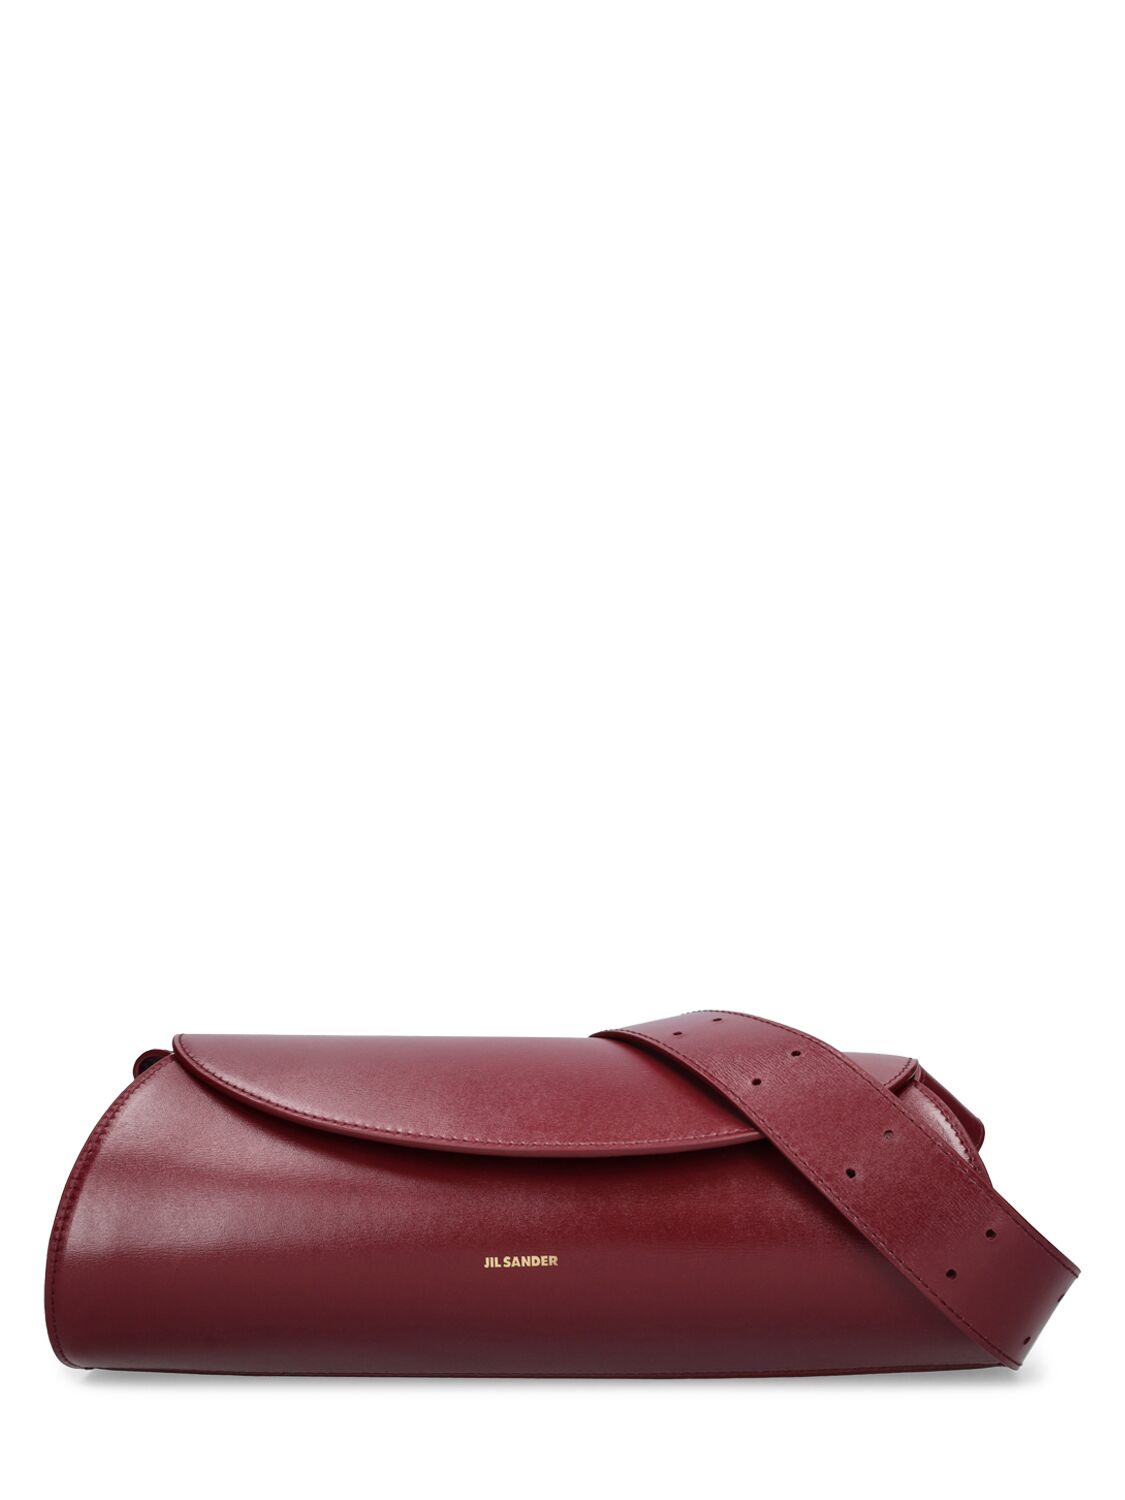 Image of Small Cannolo Leather Shoulder Bag